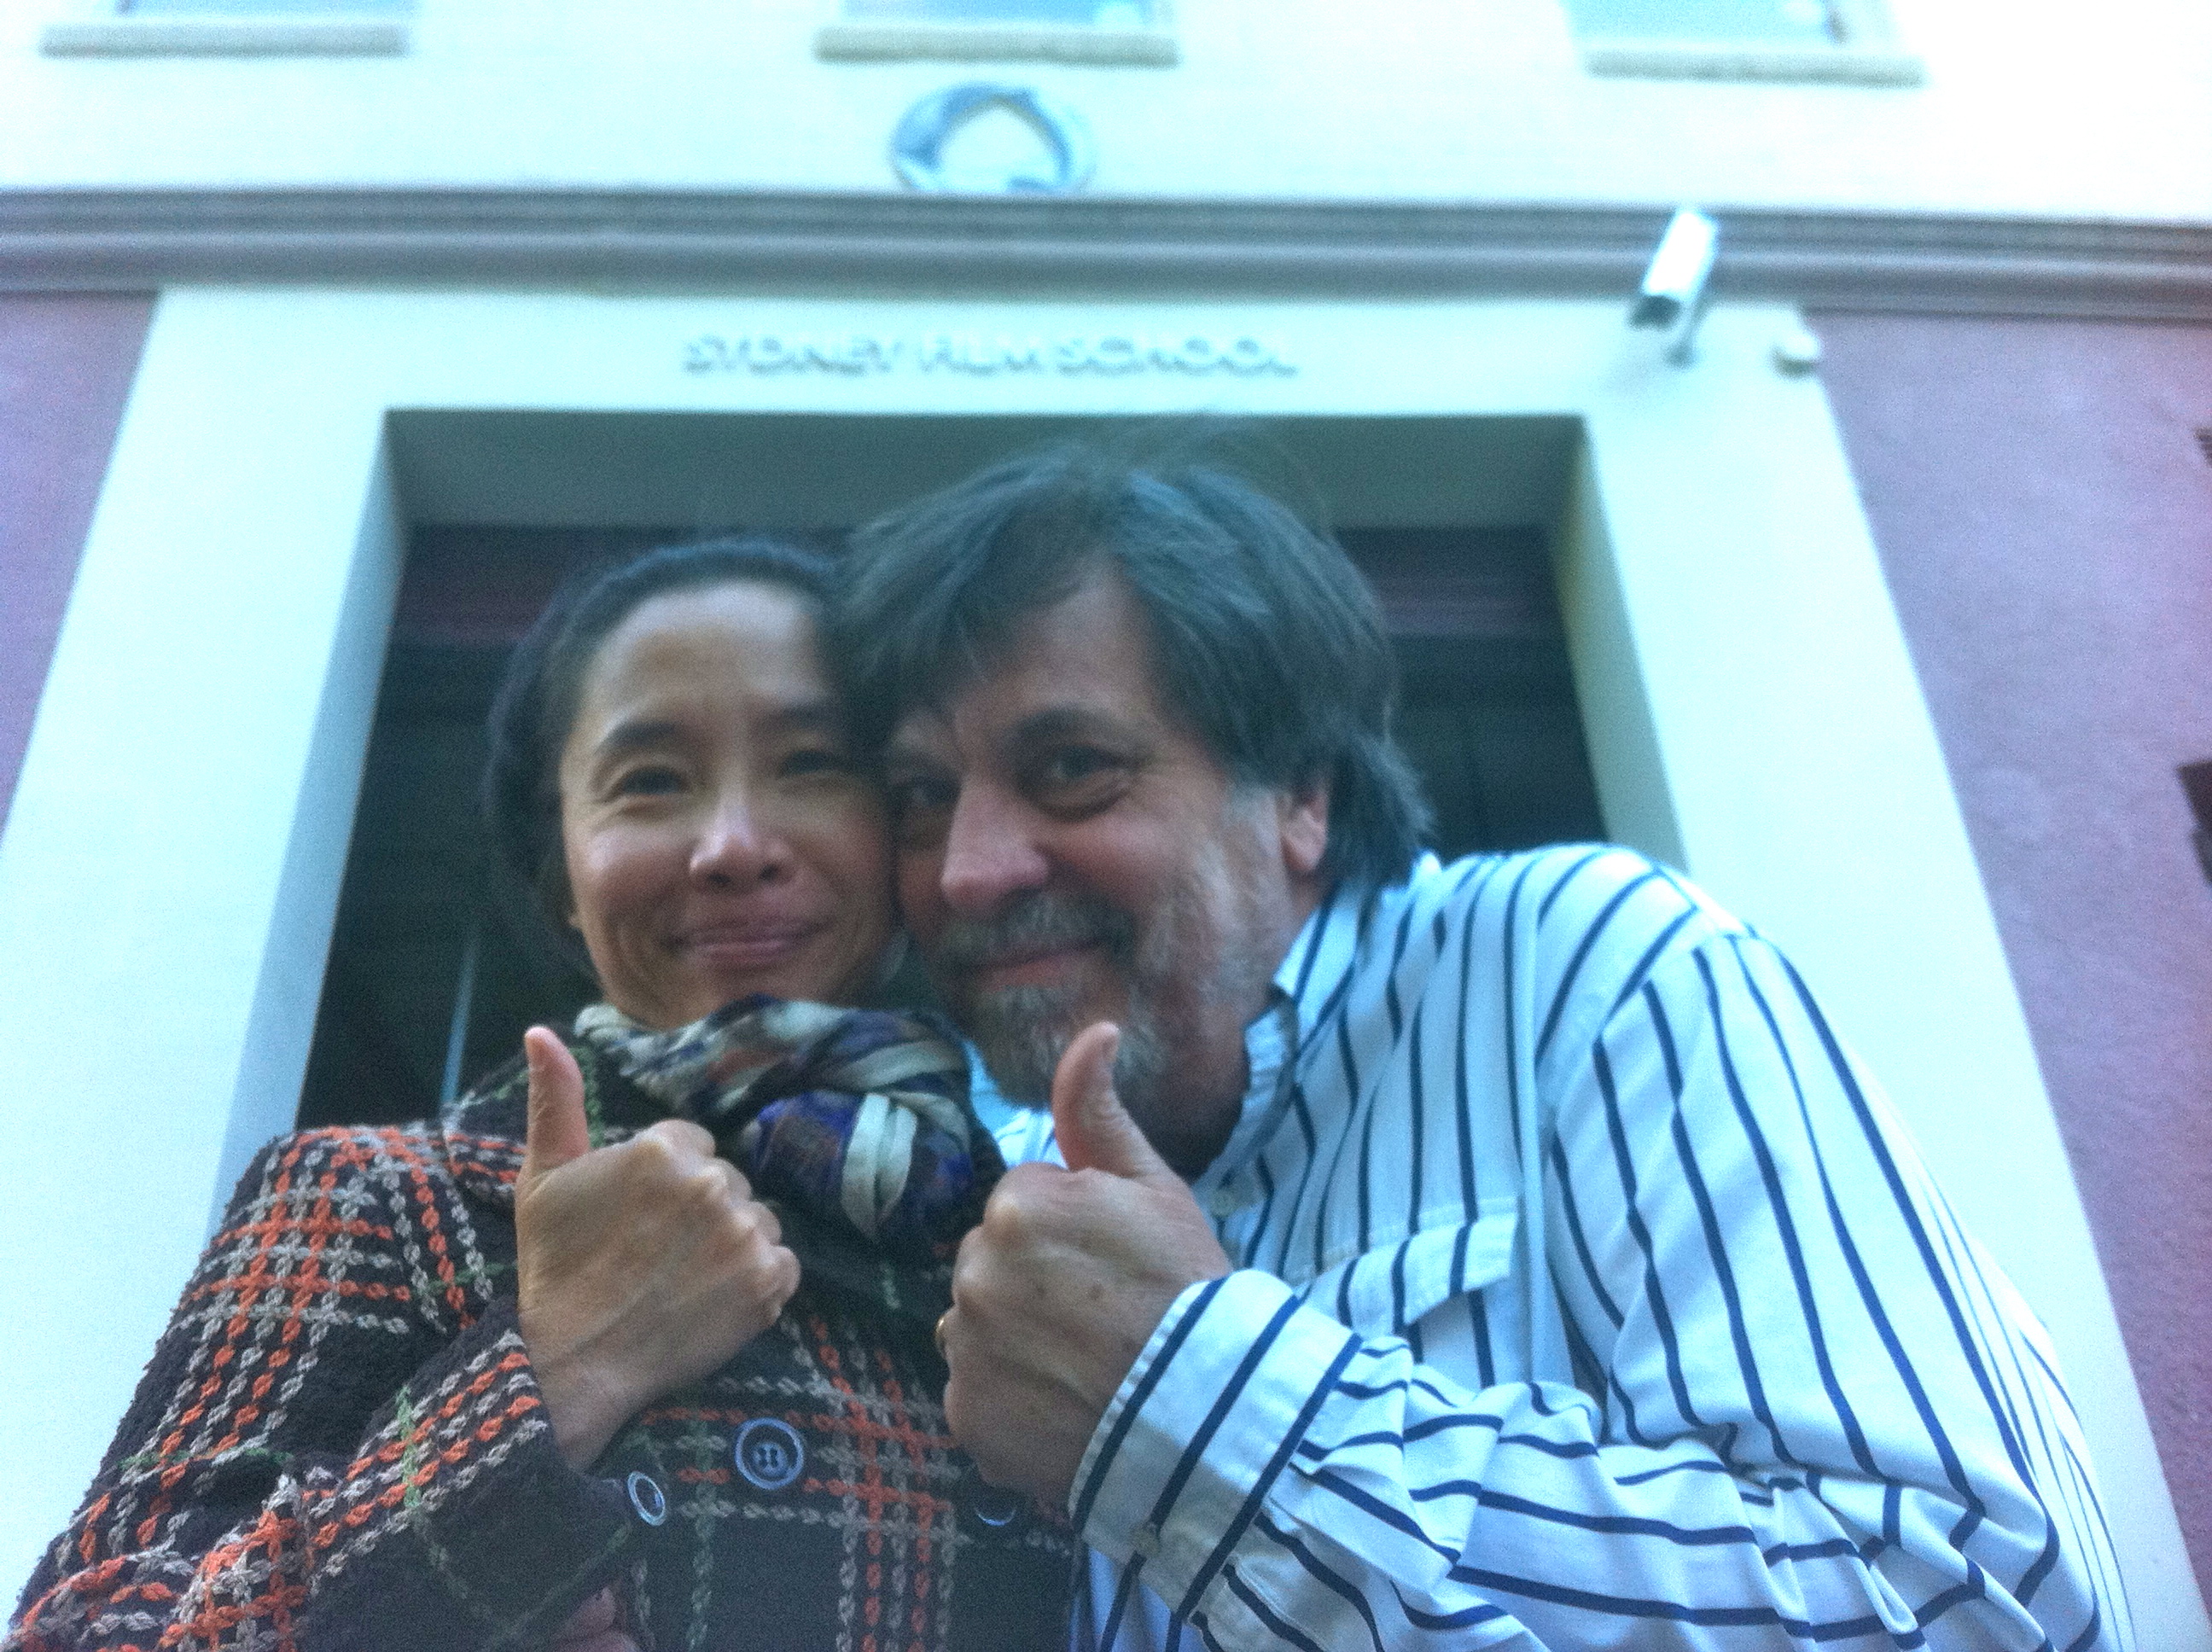 Leslie and Uracha Oliver in front of Sydney Film School May 2014